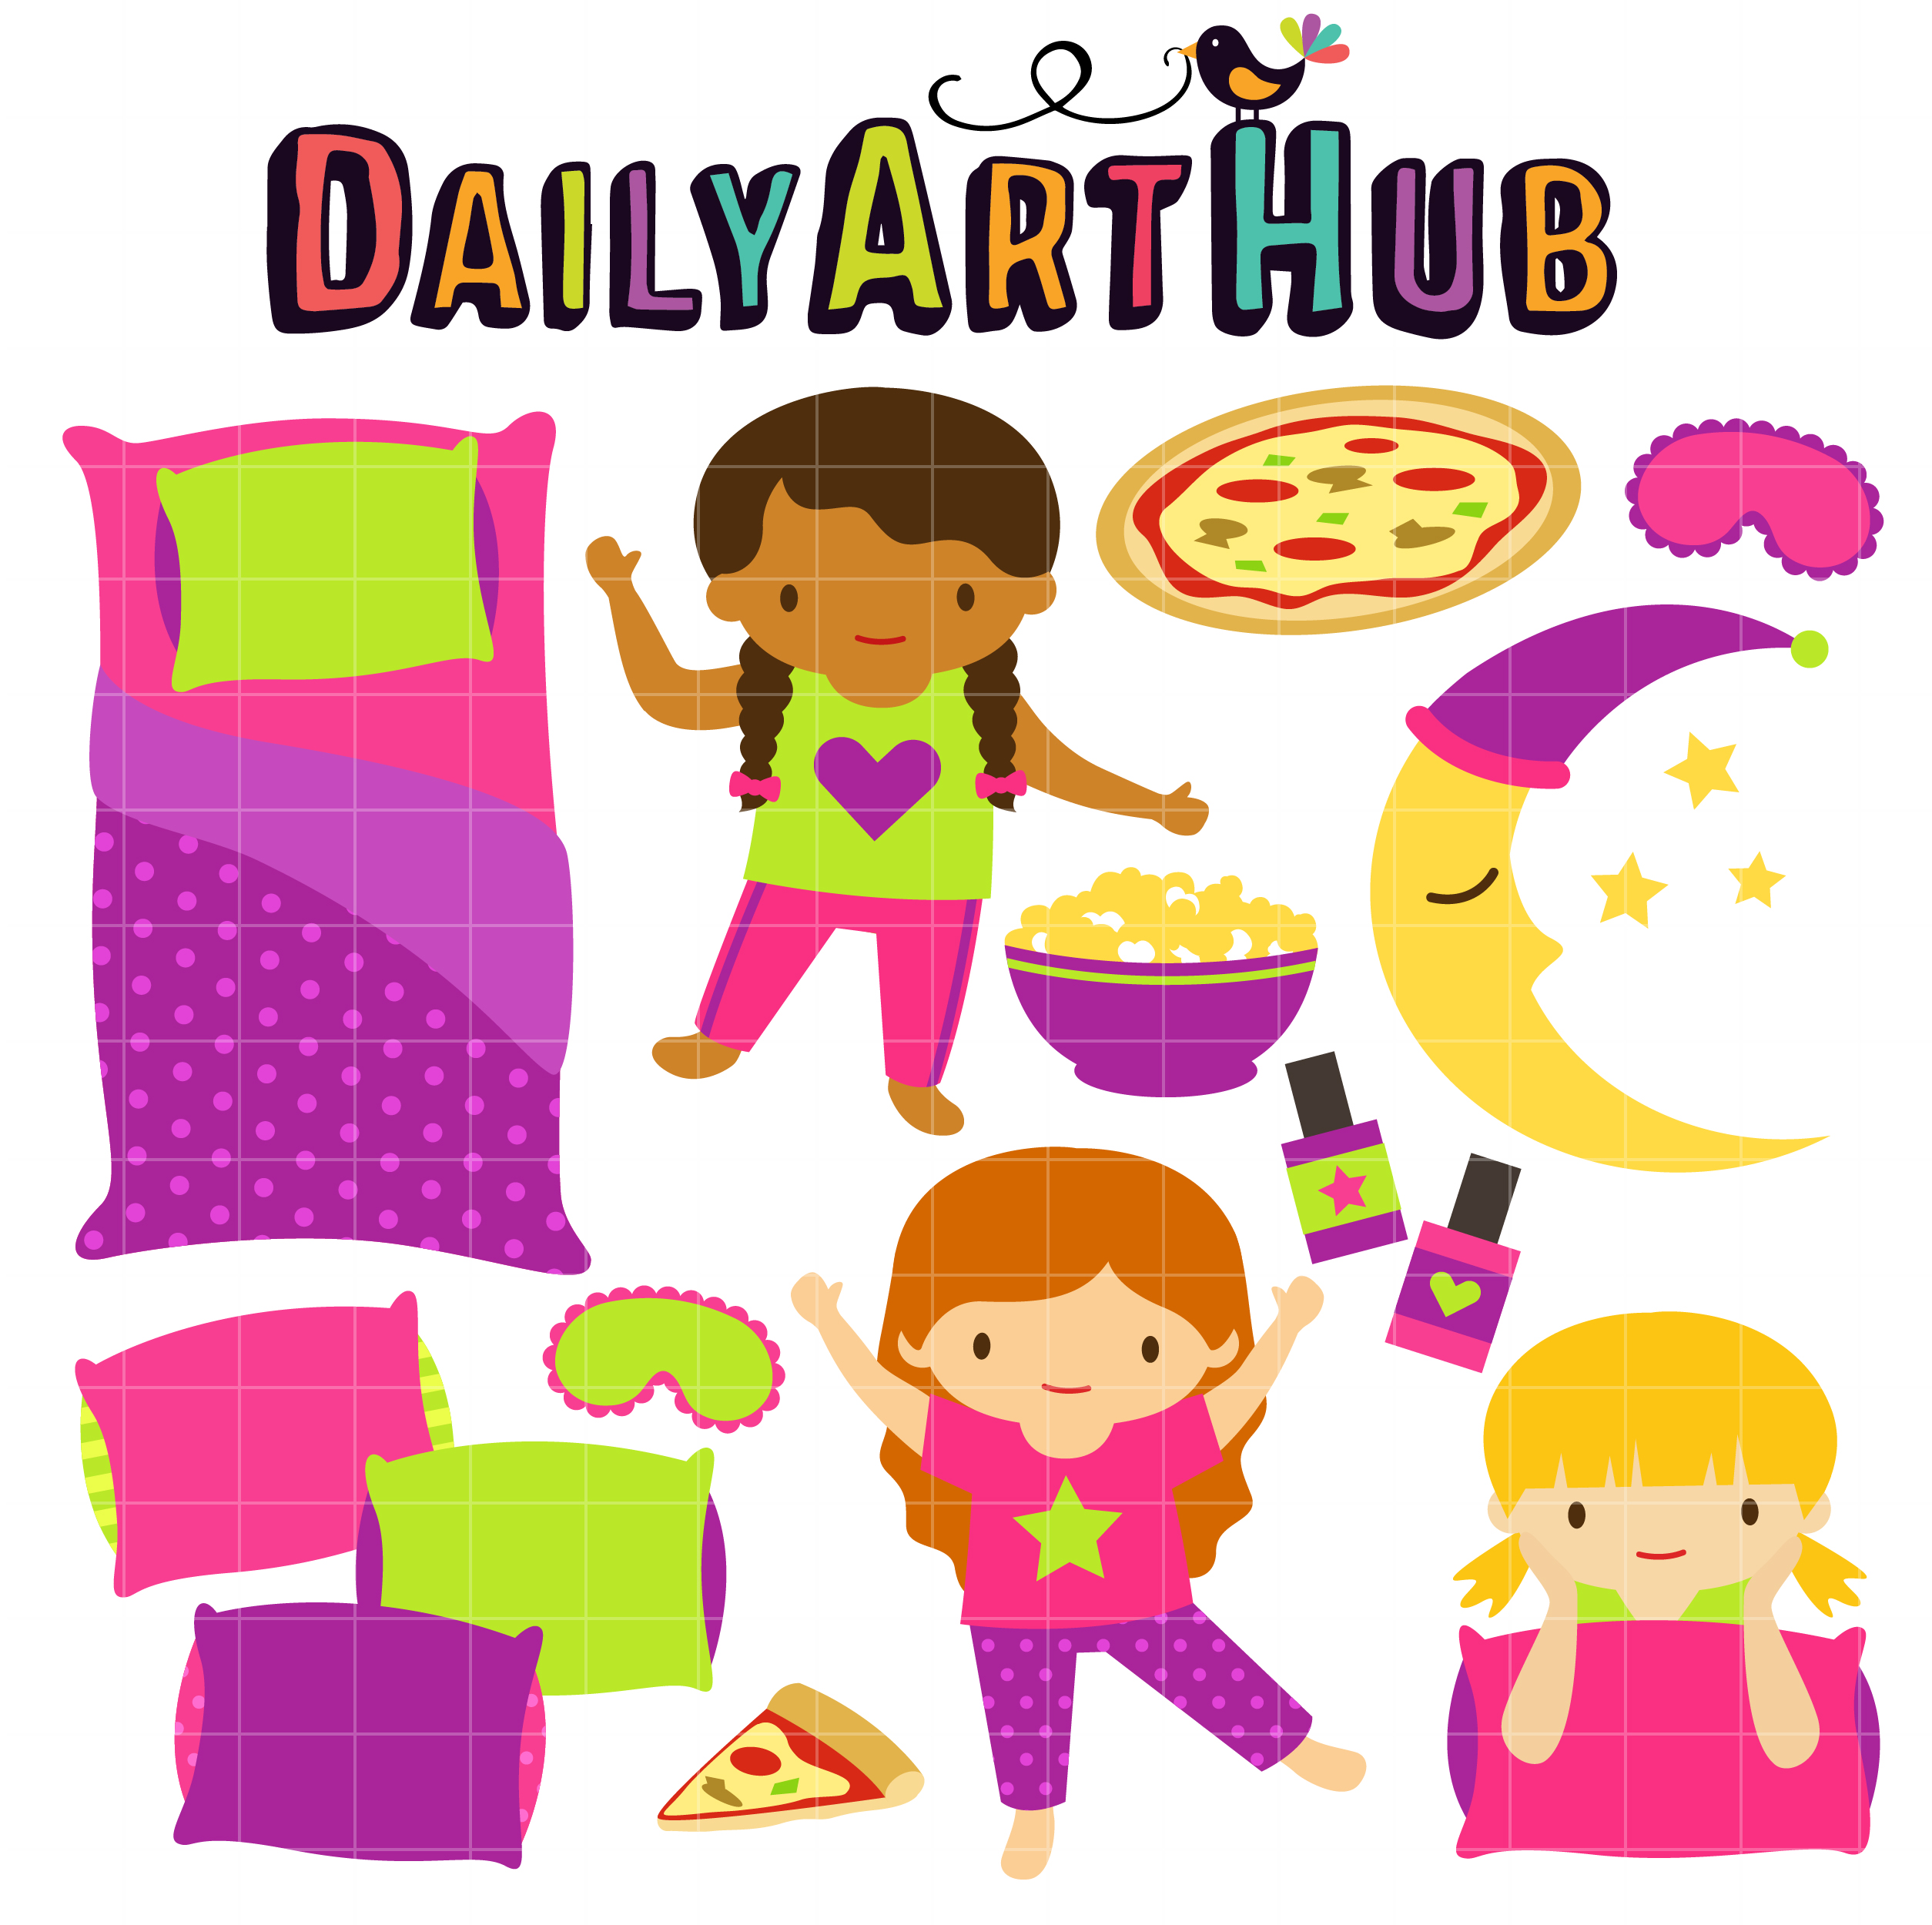 Three Girls Playing Pillow Fight At The Slumber Party Illustration